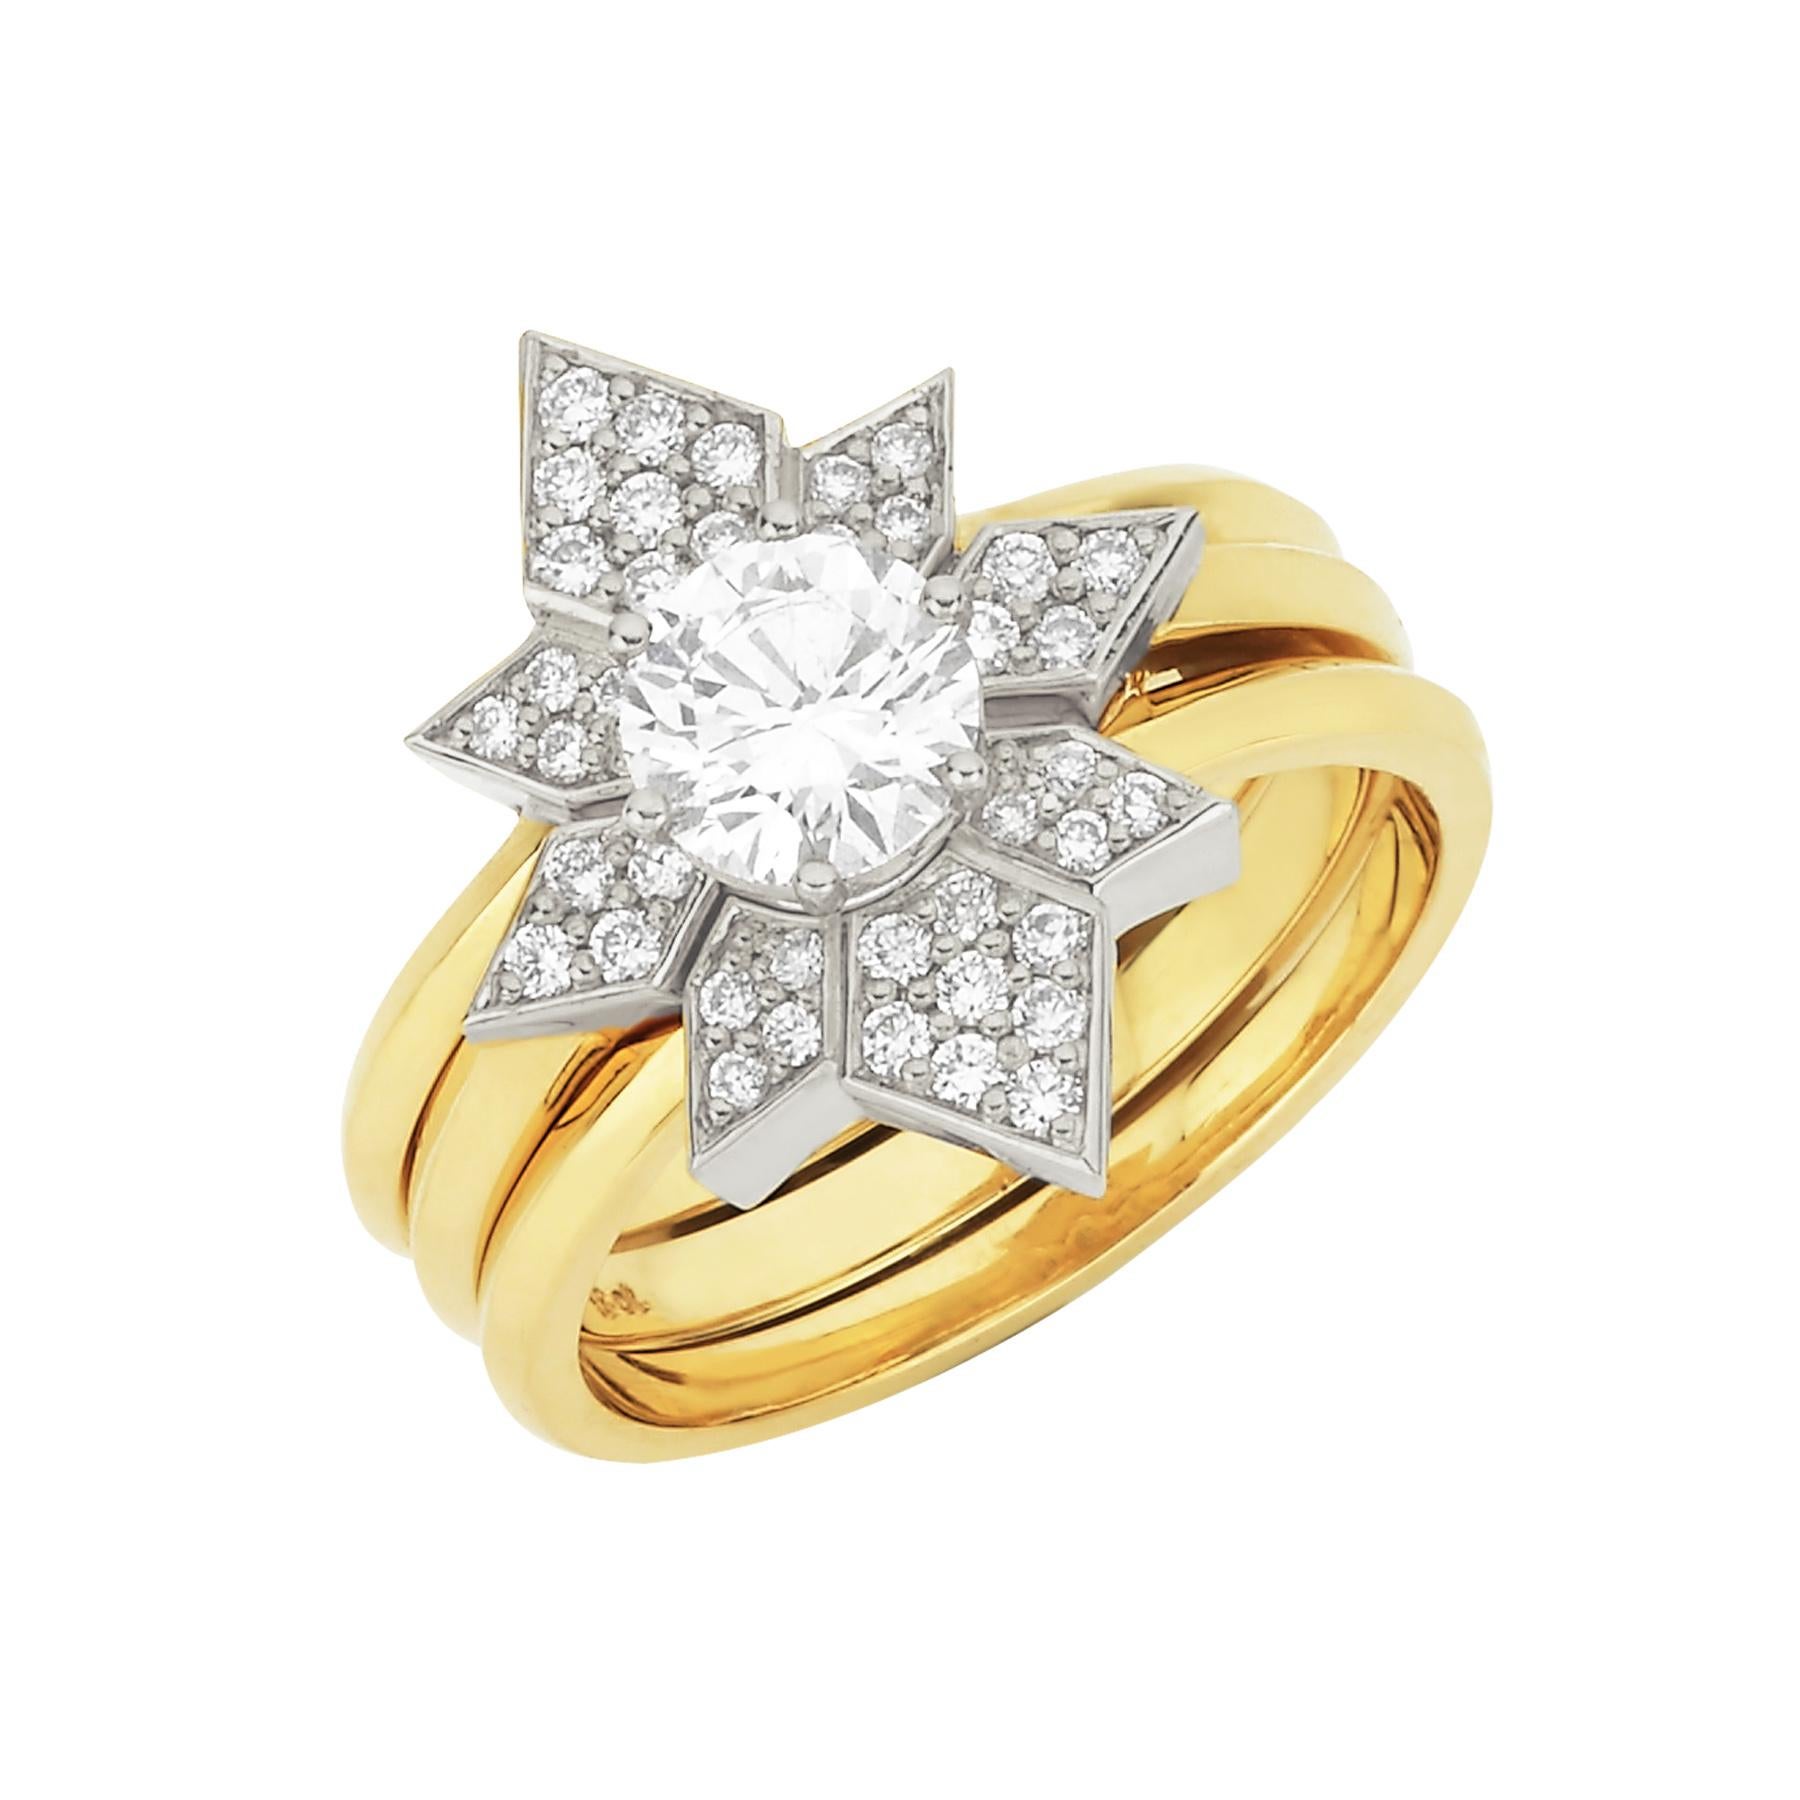 Set size: 53

The Dahlia and Amara Ring Set is a symbol of the spark of love. The harmonious design of the three rings creates a radiant geometrical shape with the solitaire diamond shining brightly from within. The setting is made from platinum to